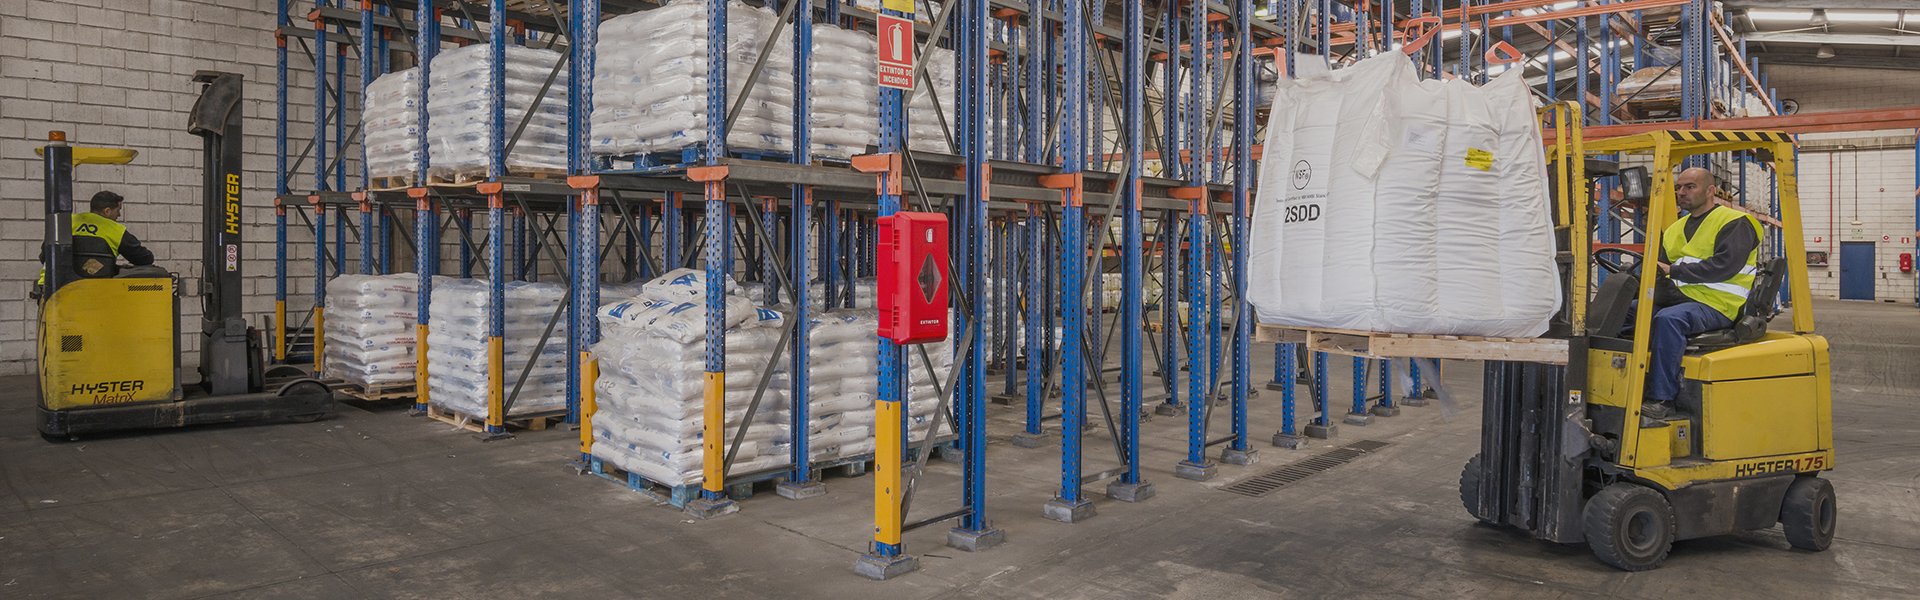 RFID Forklift Safety Solutions